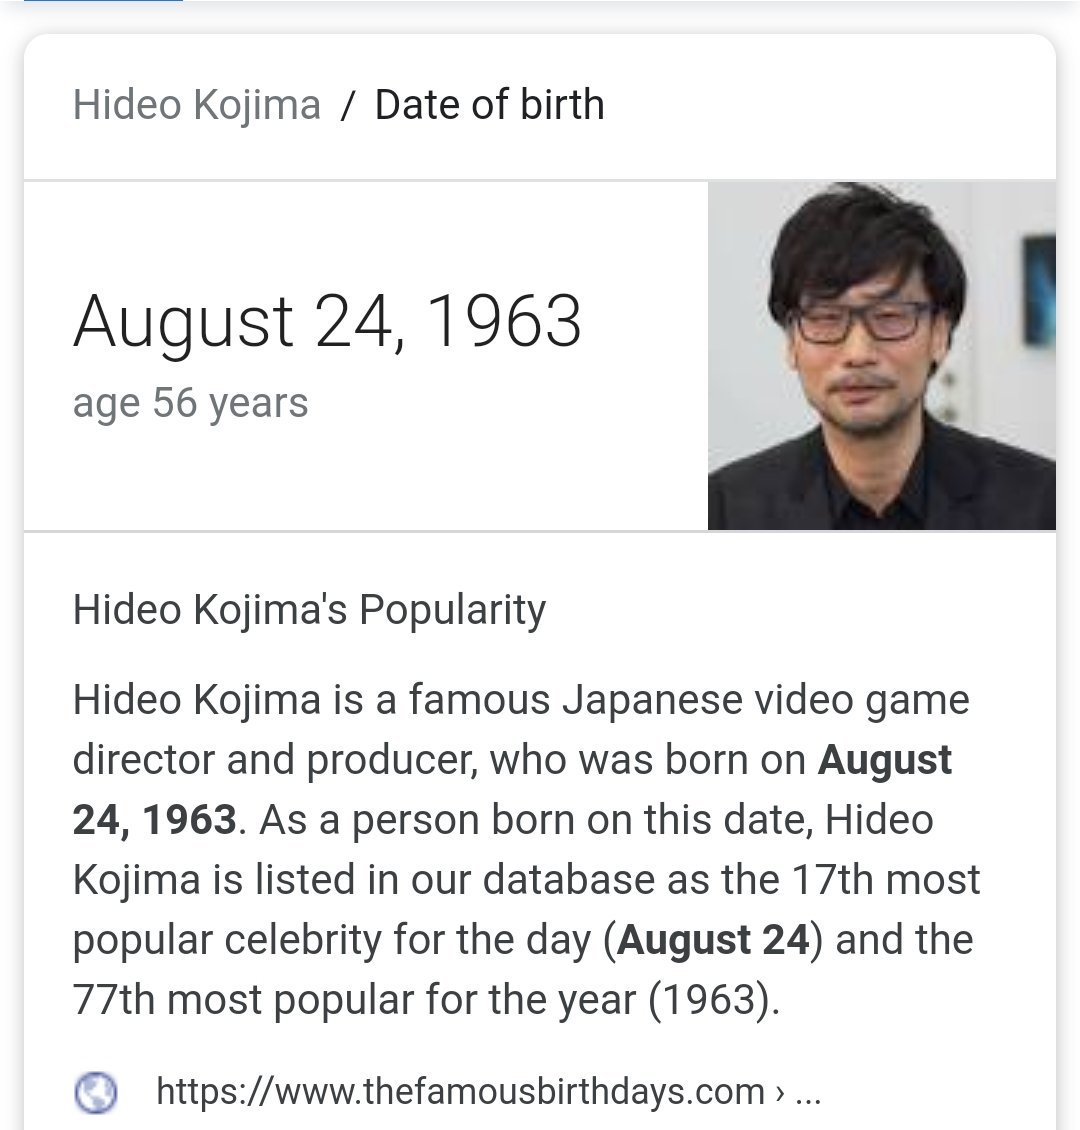 I always knew we were connected. Happy to share the same birthday with 